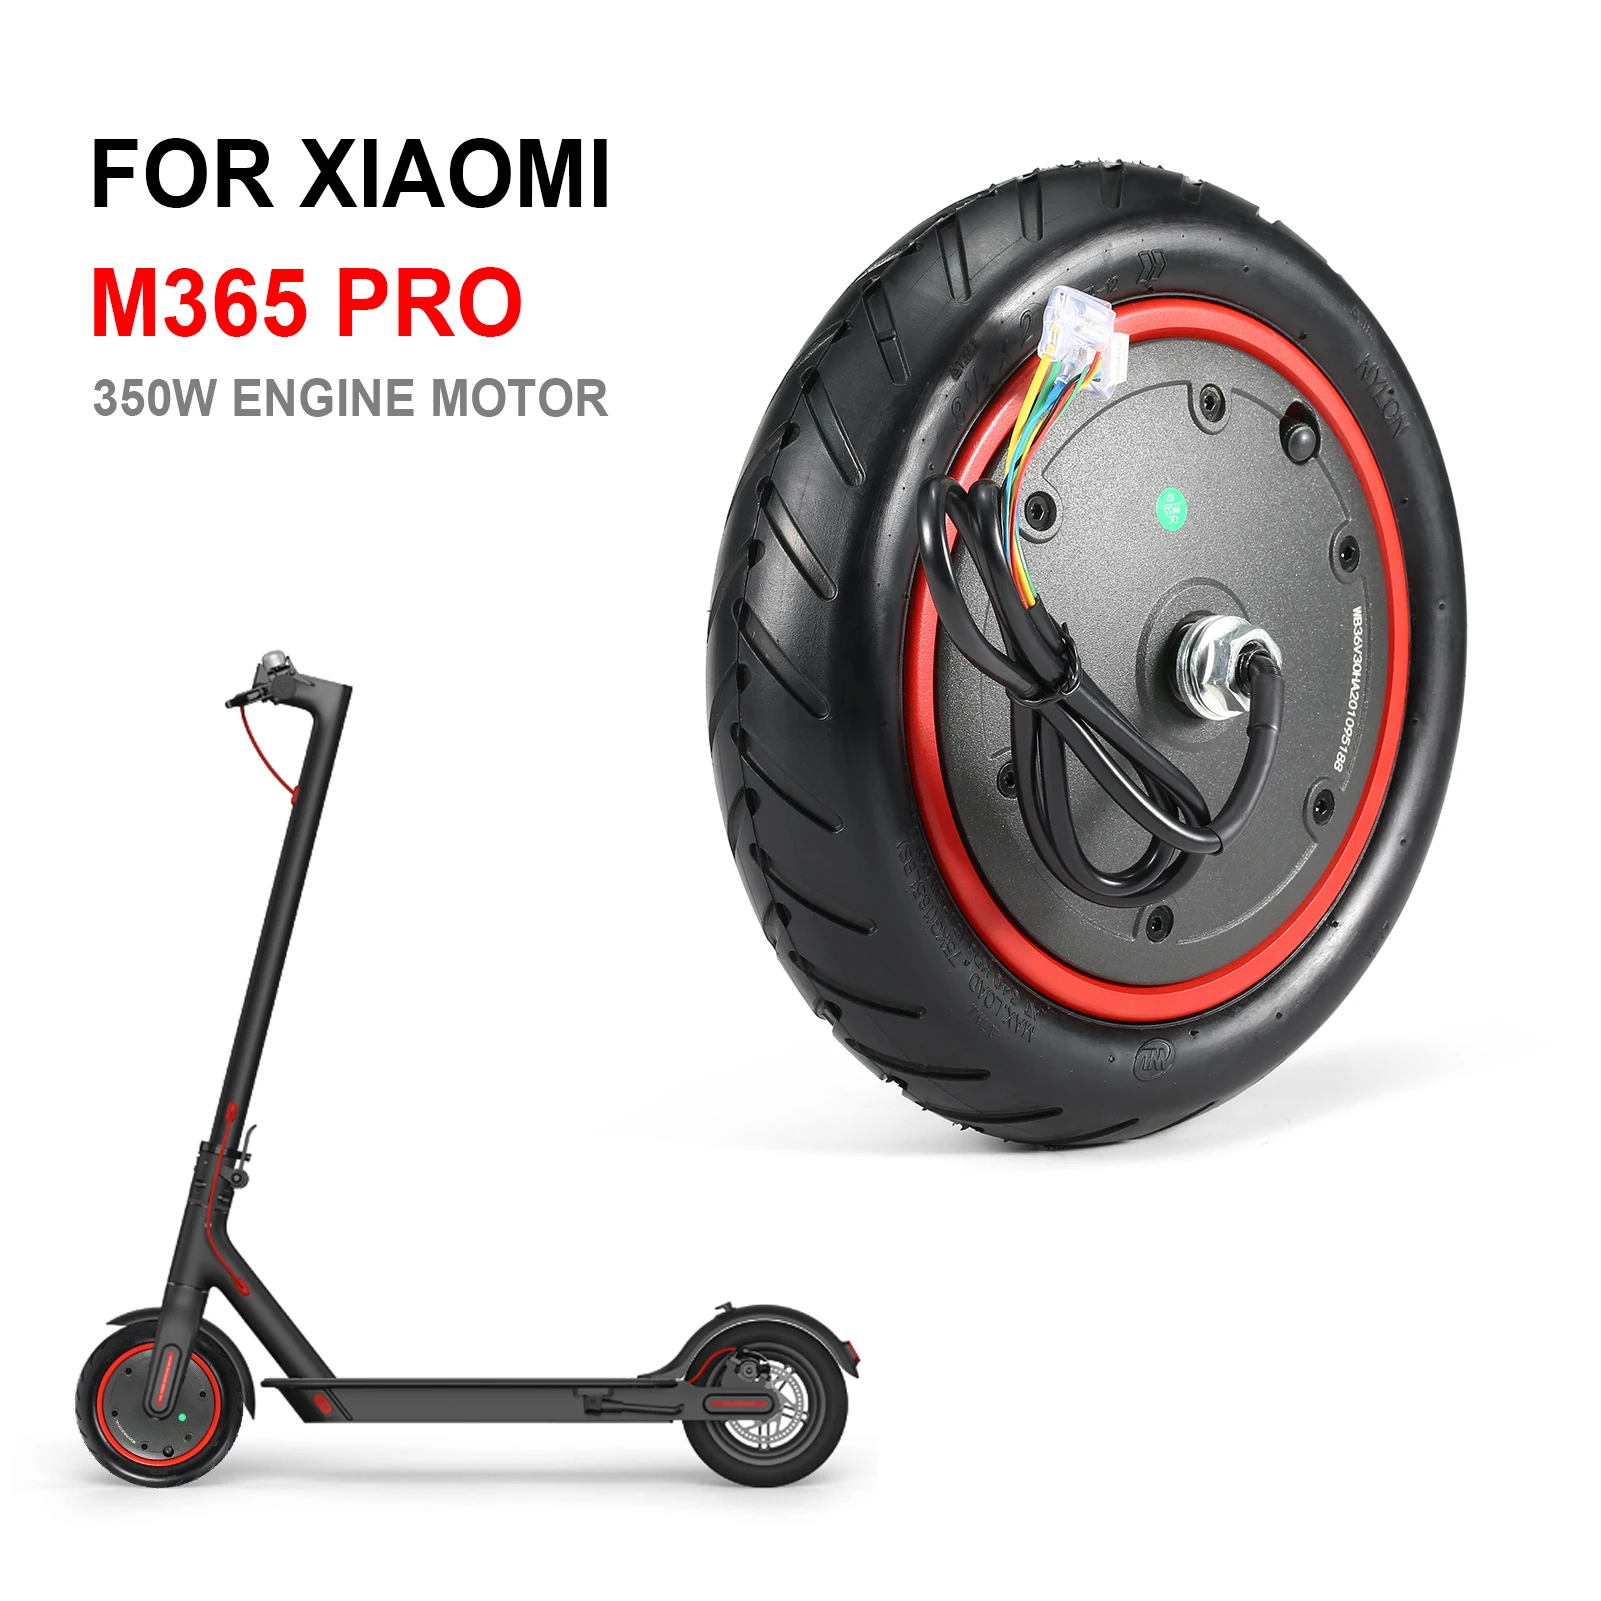 Cable guard motor scooter xiaomi m365/m365 pro 1 meter